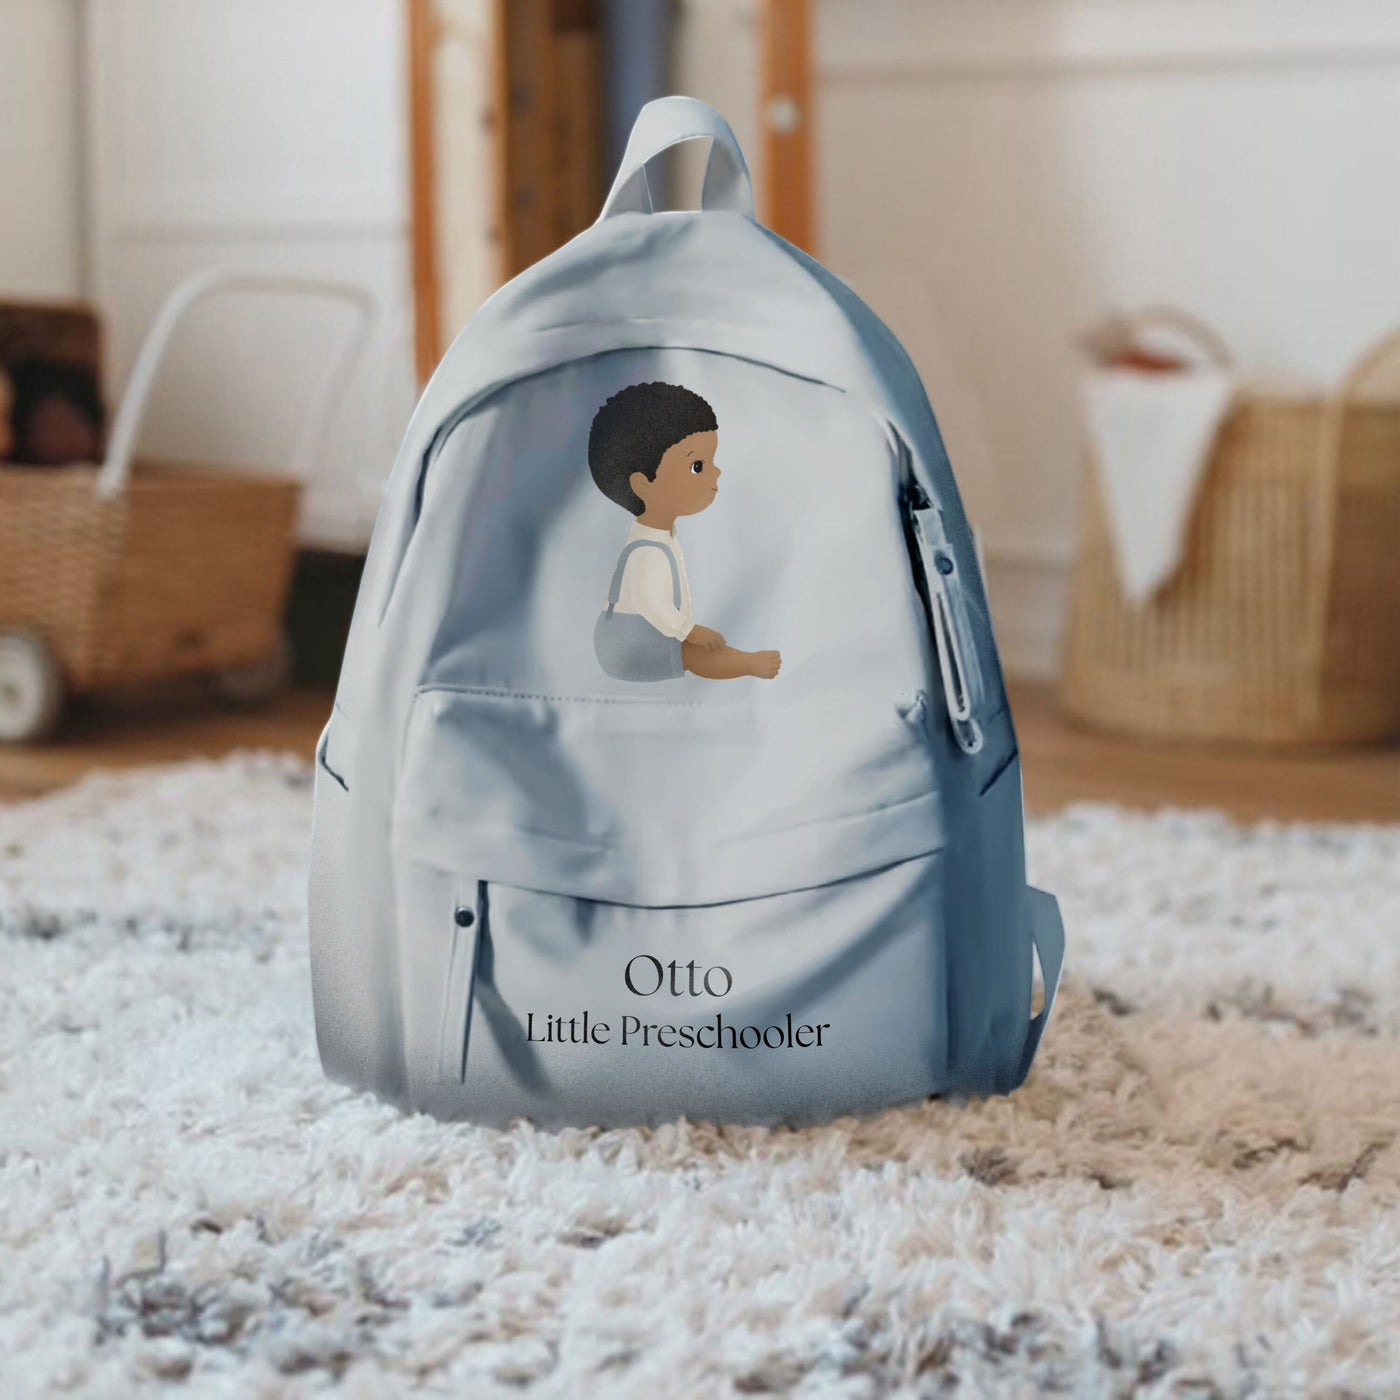 Personalized Backpacks With a Custom Illustration of Your Child